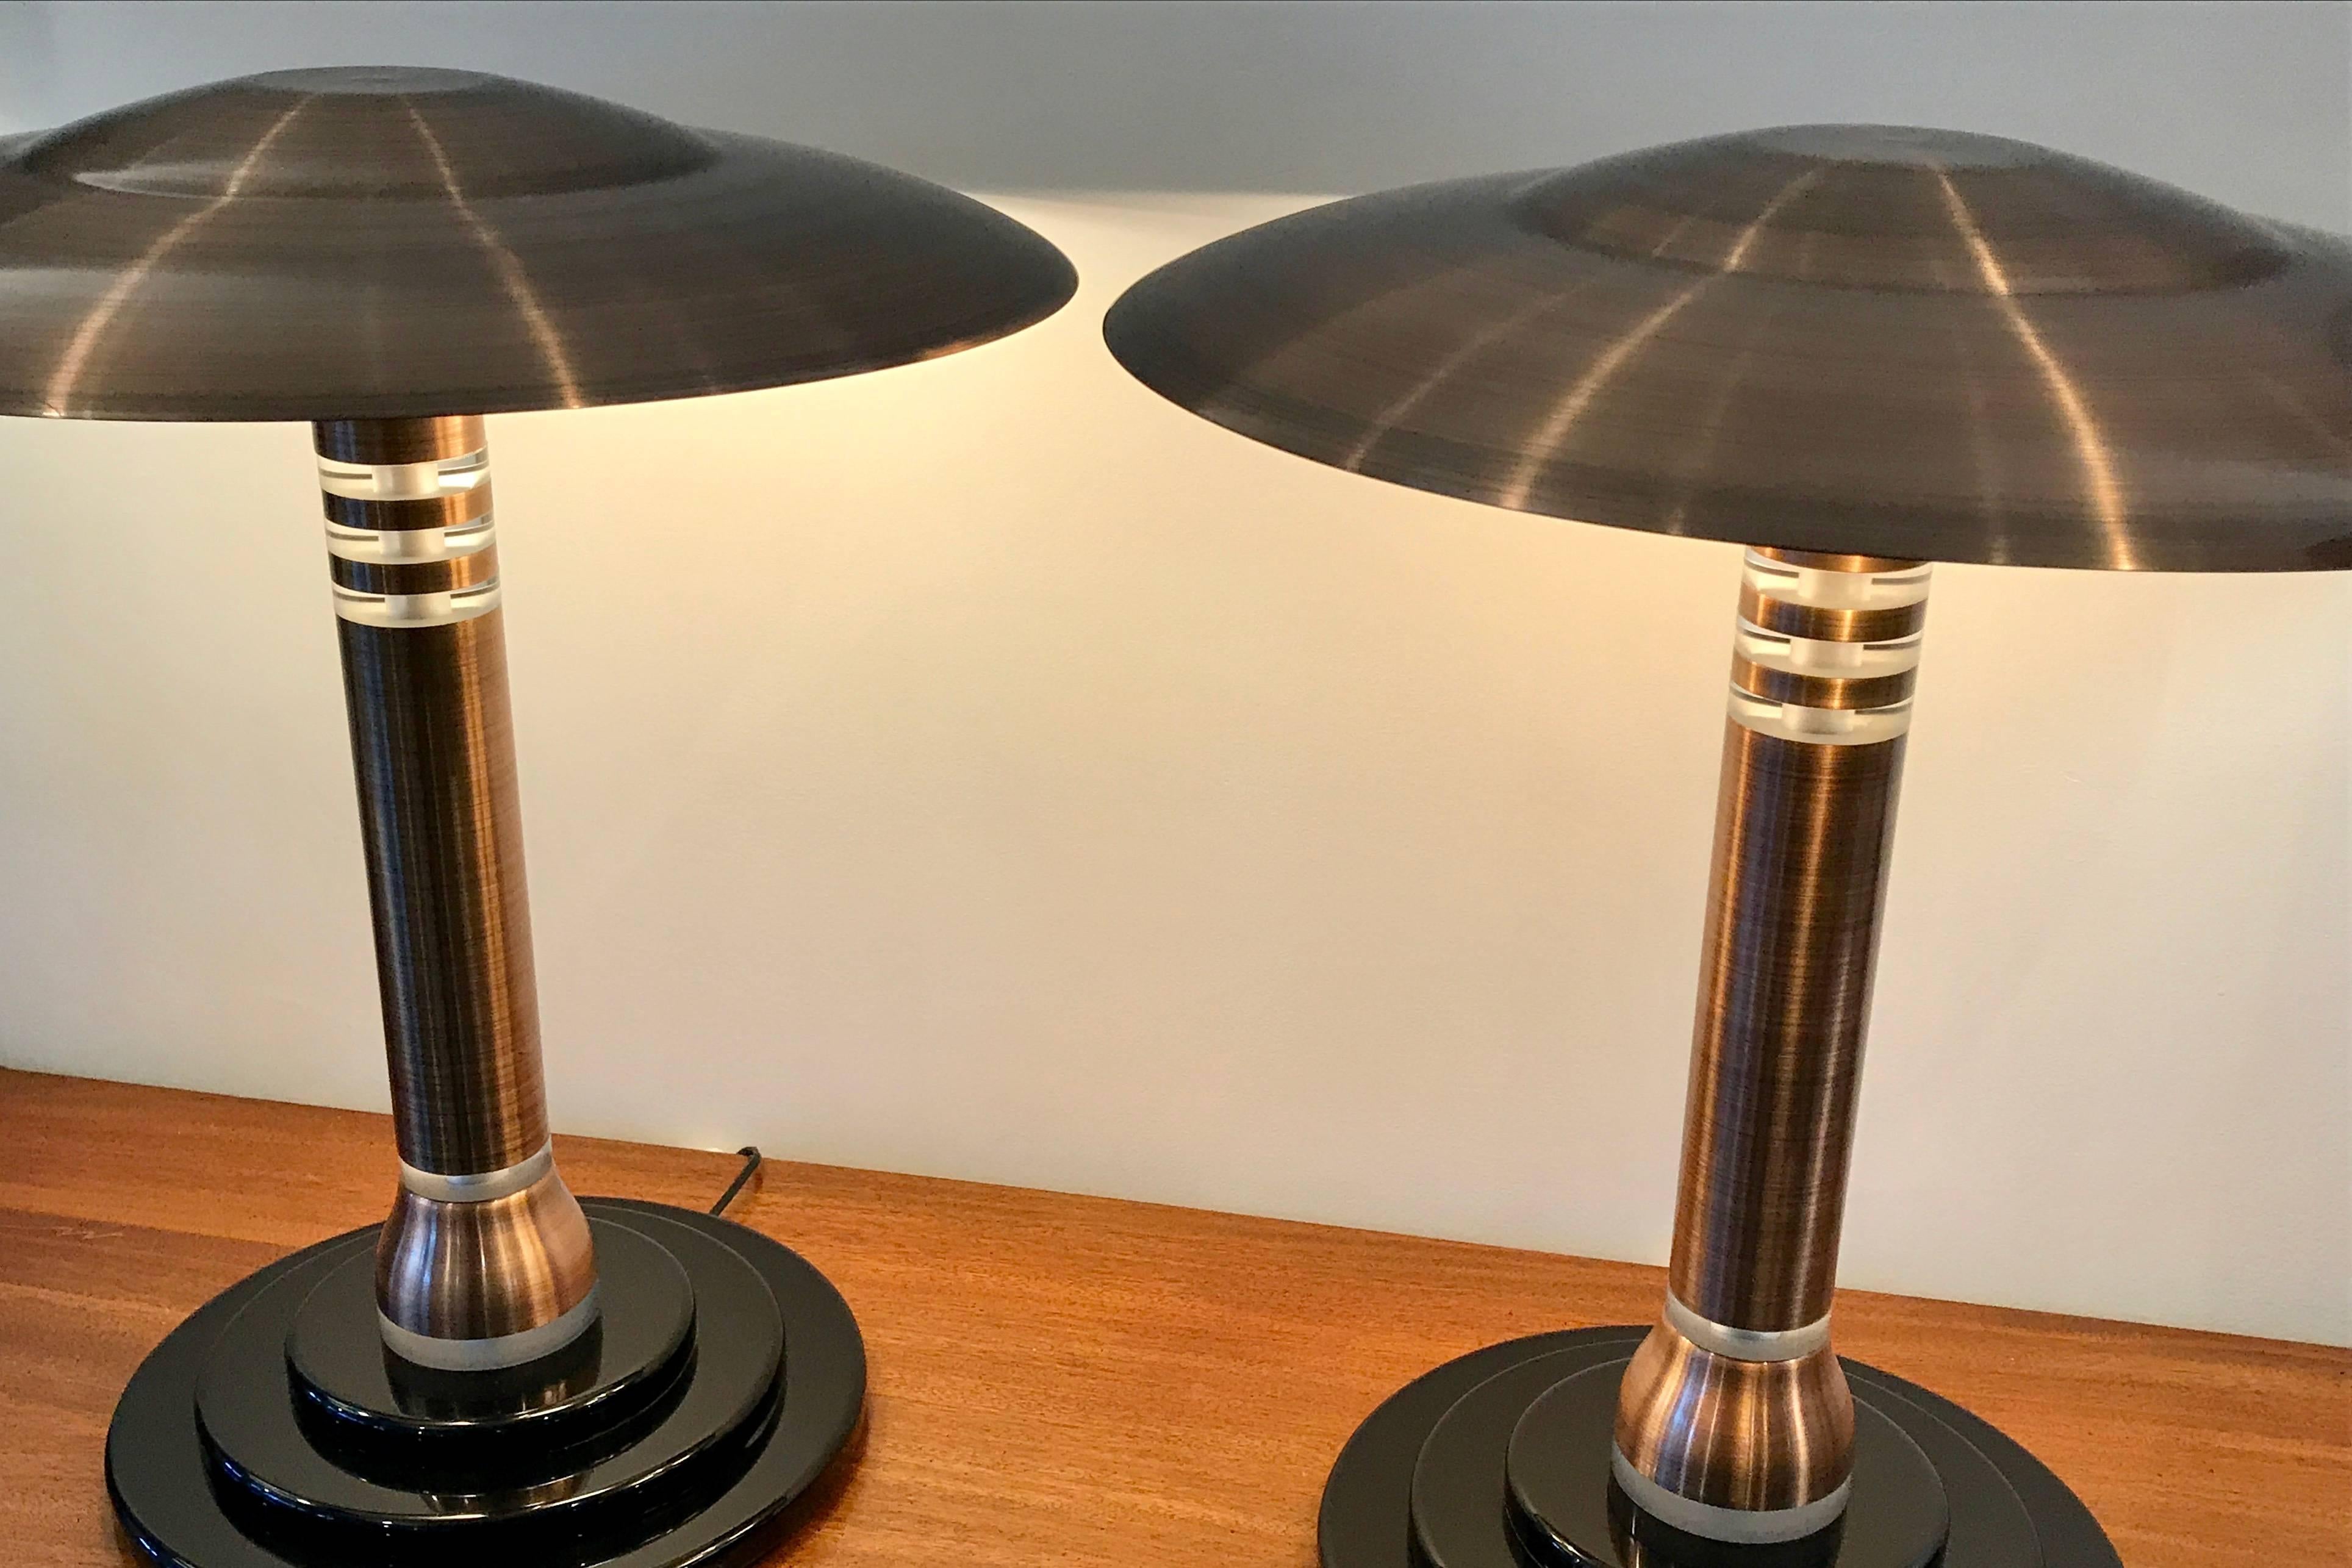 Massive pair of Art Deco style table lamps.  Very heavy, made of metal and lucite mounted on a three tier circular base.  The finish on the metal is a high gloss brushed copper color.  Maker unknown but very high quality.